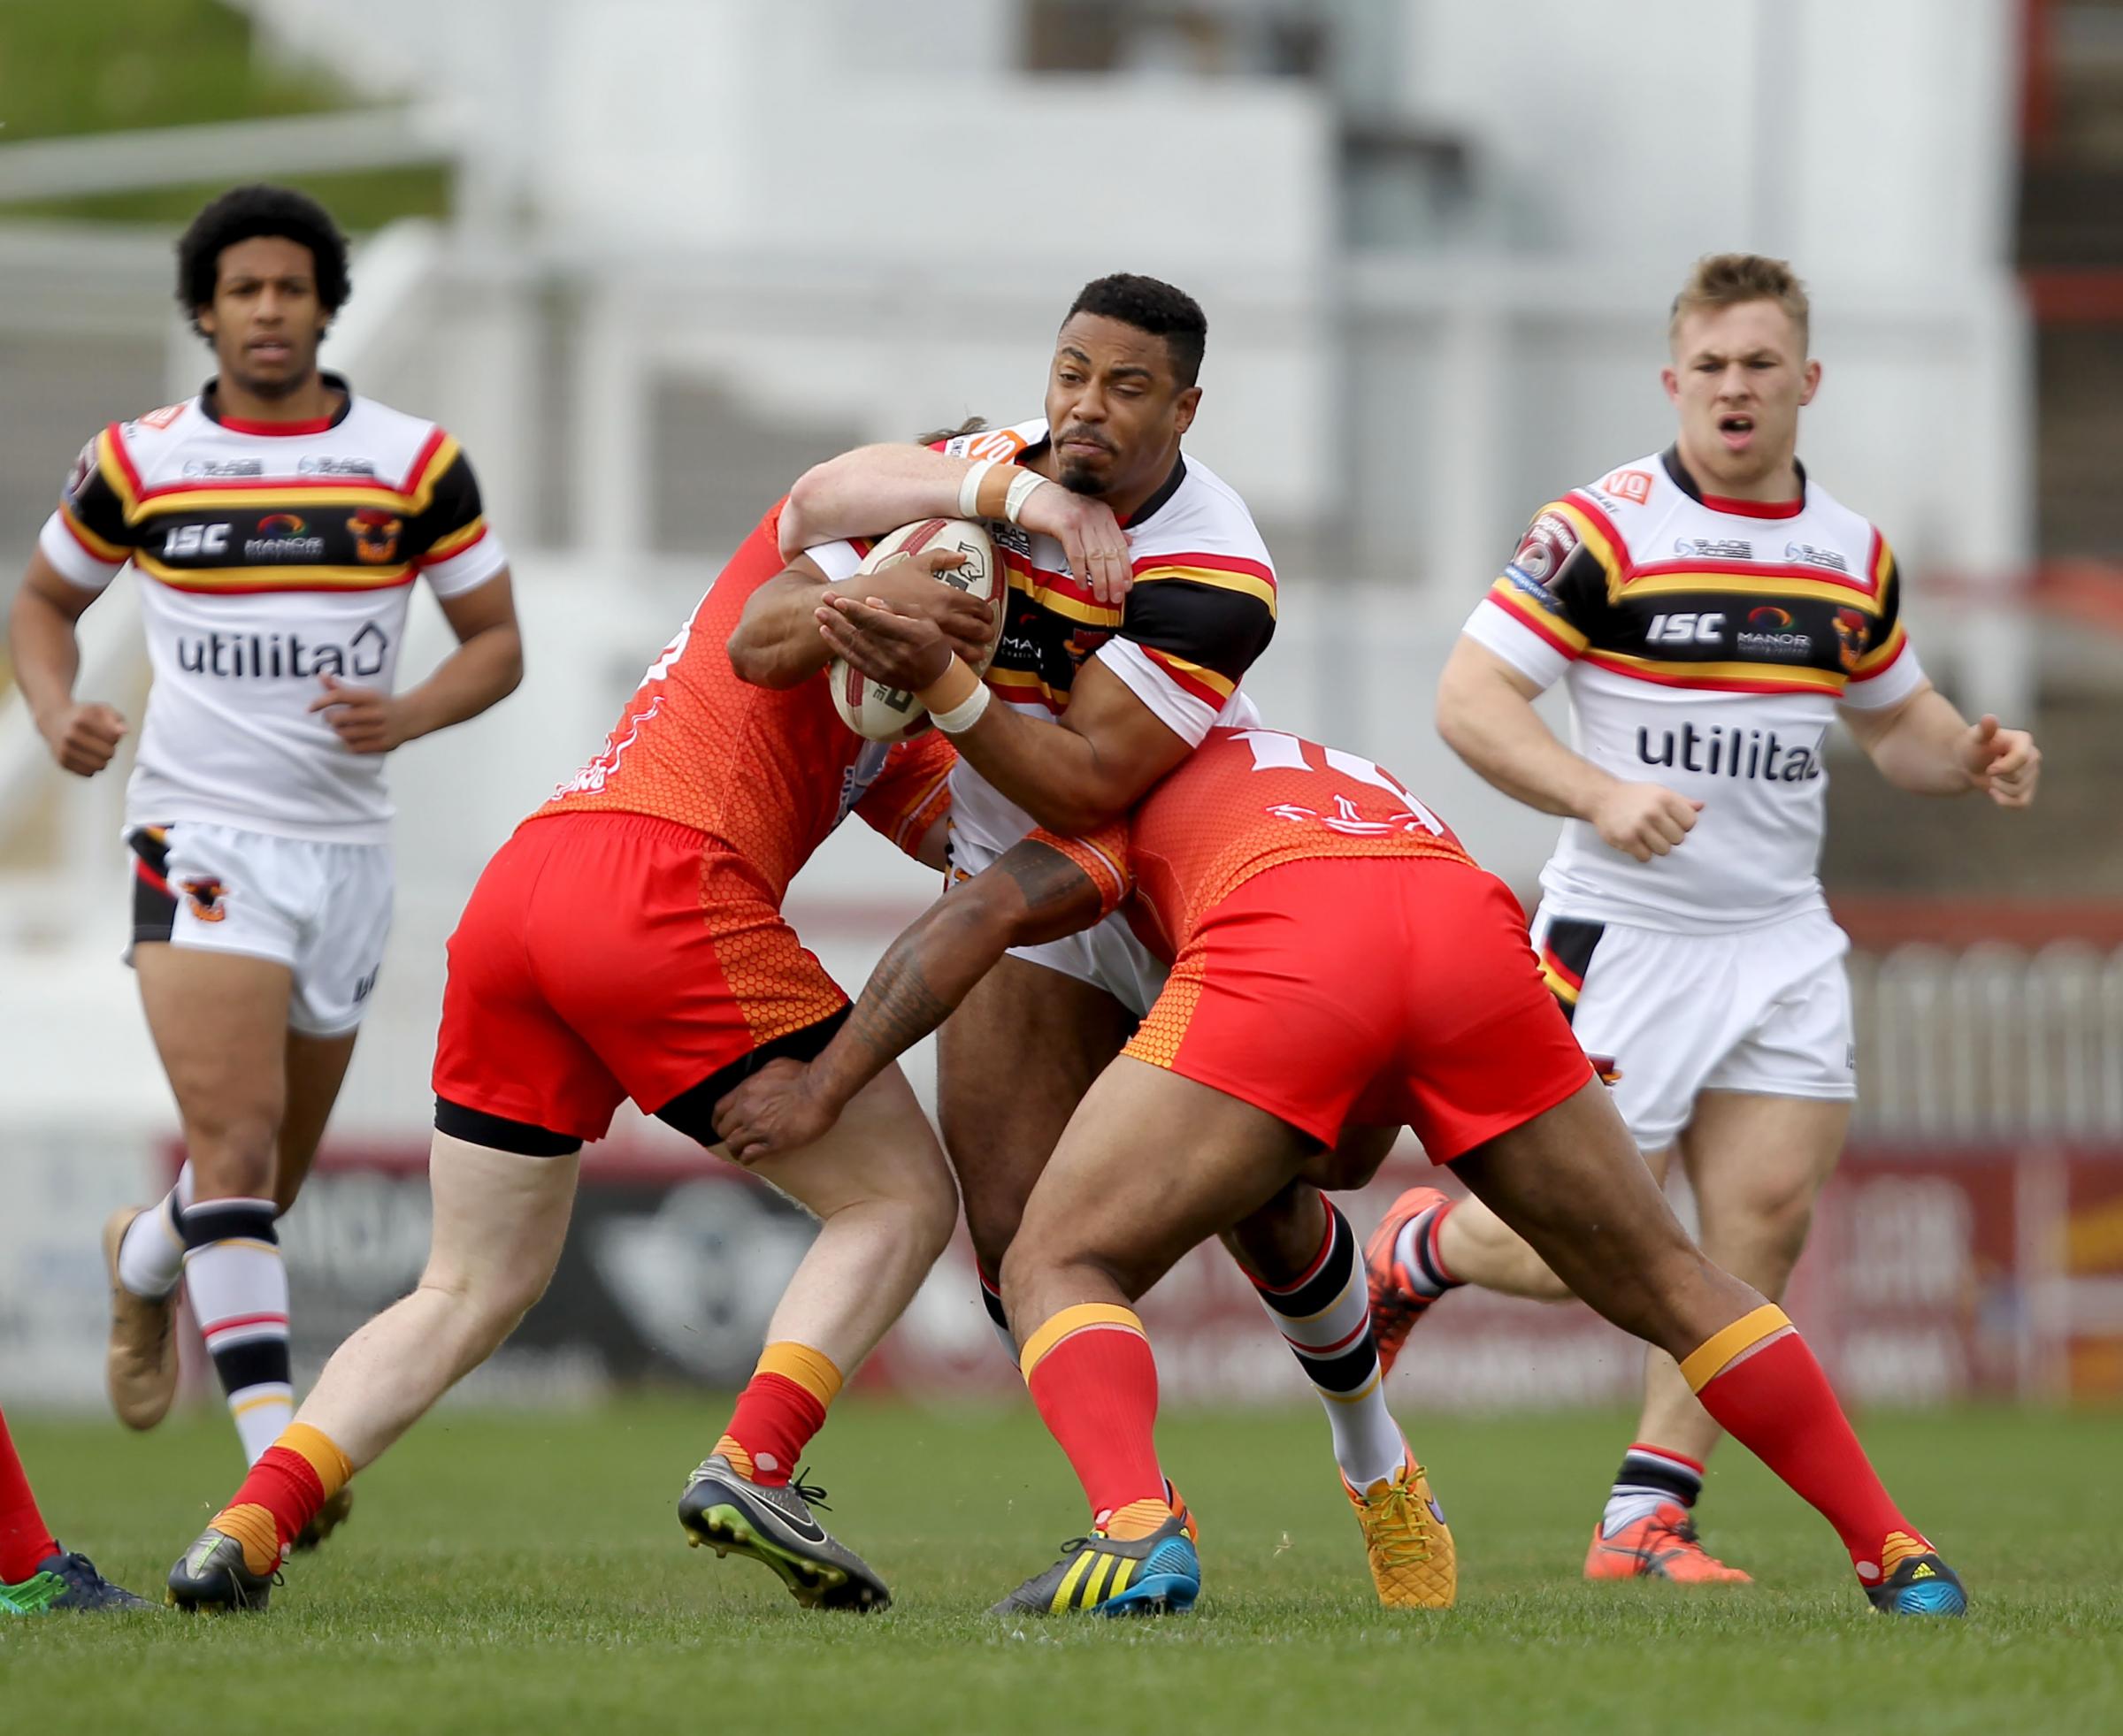 19-MAN SQUAD: Magrin and Ryan back for Bradford Bulls (From ... - Bradford Telegraph and Argus